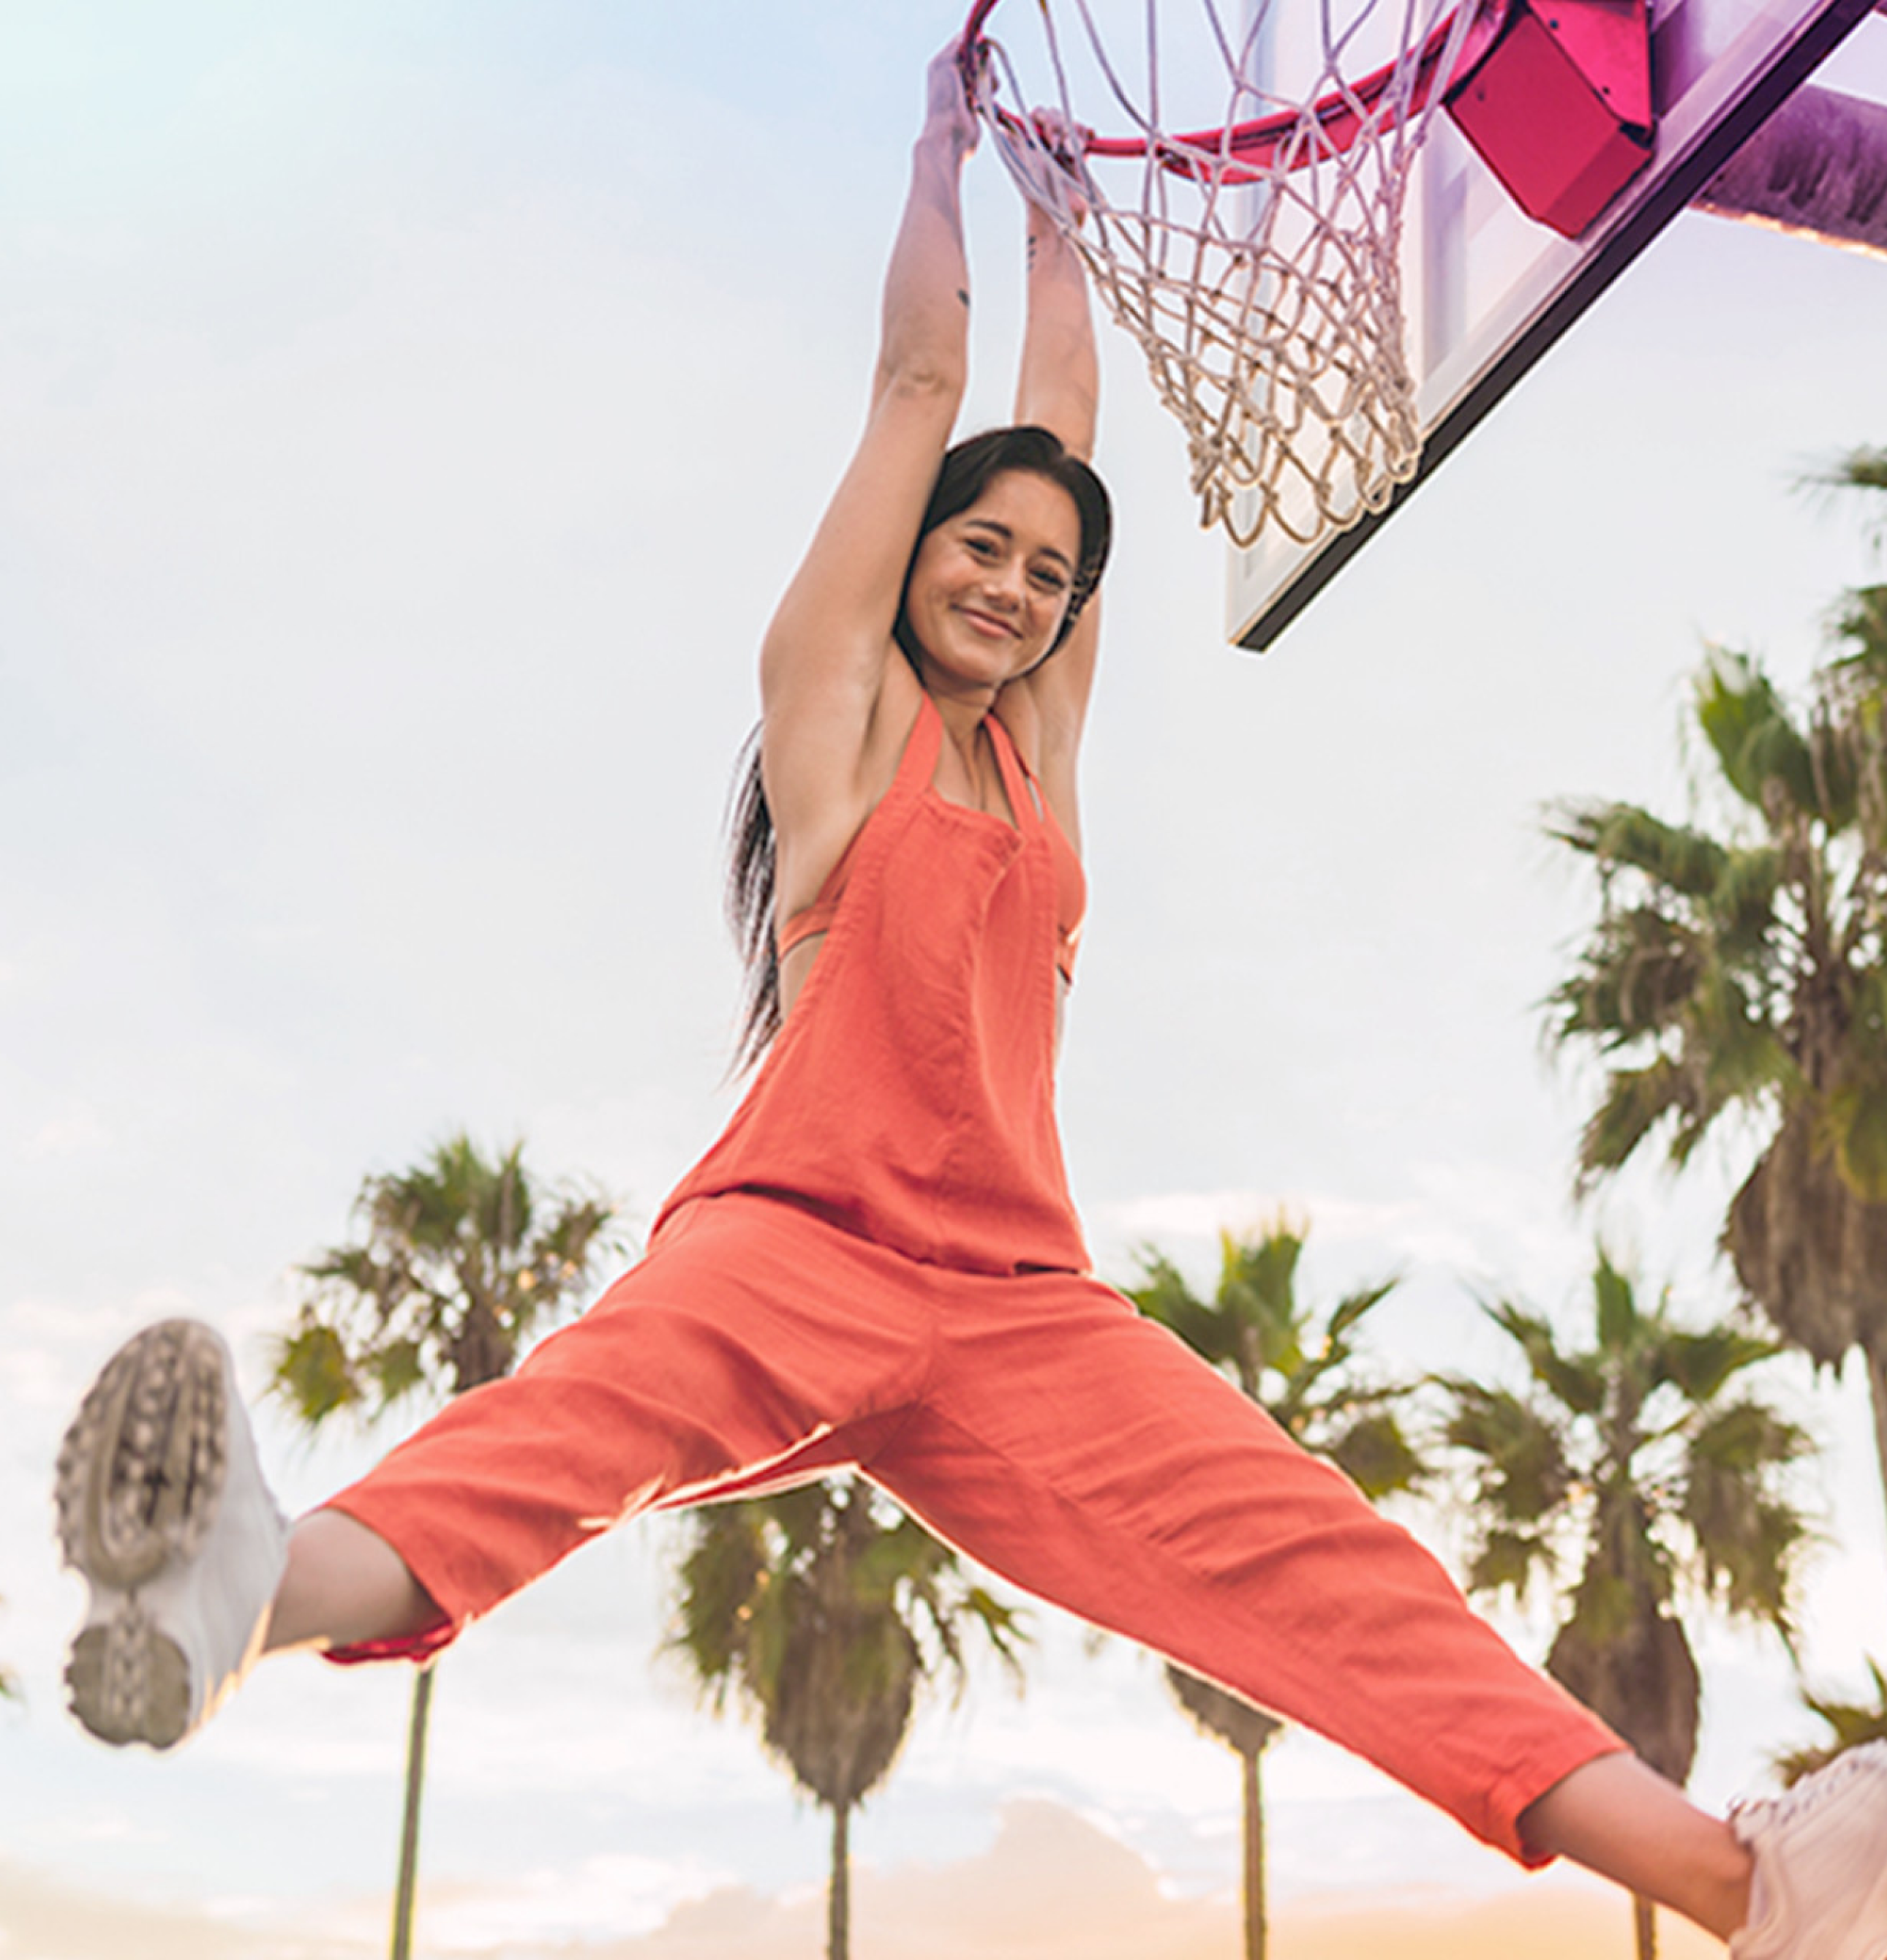 Girl playing basketball in overalls